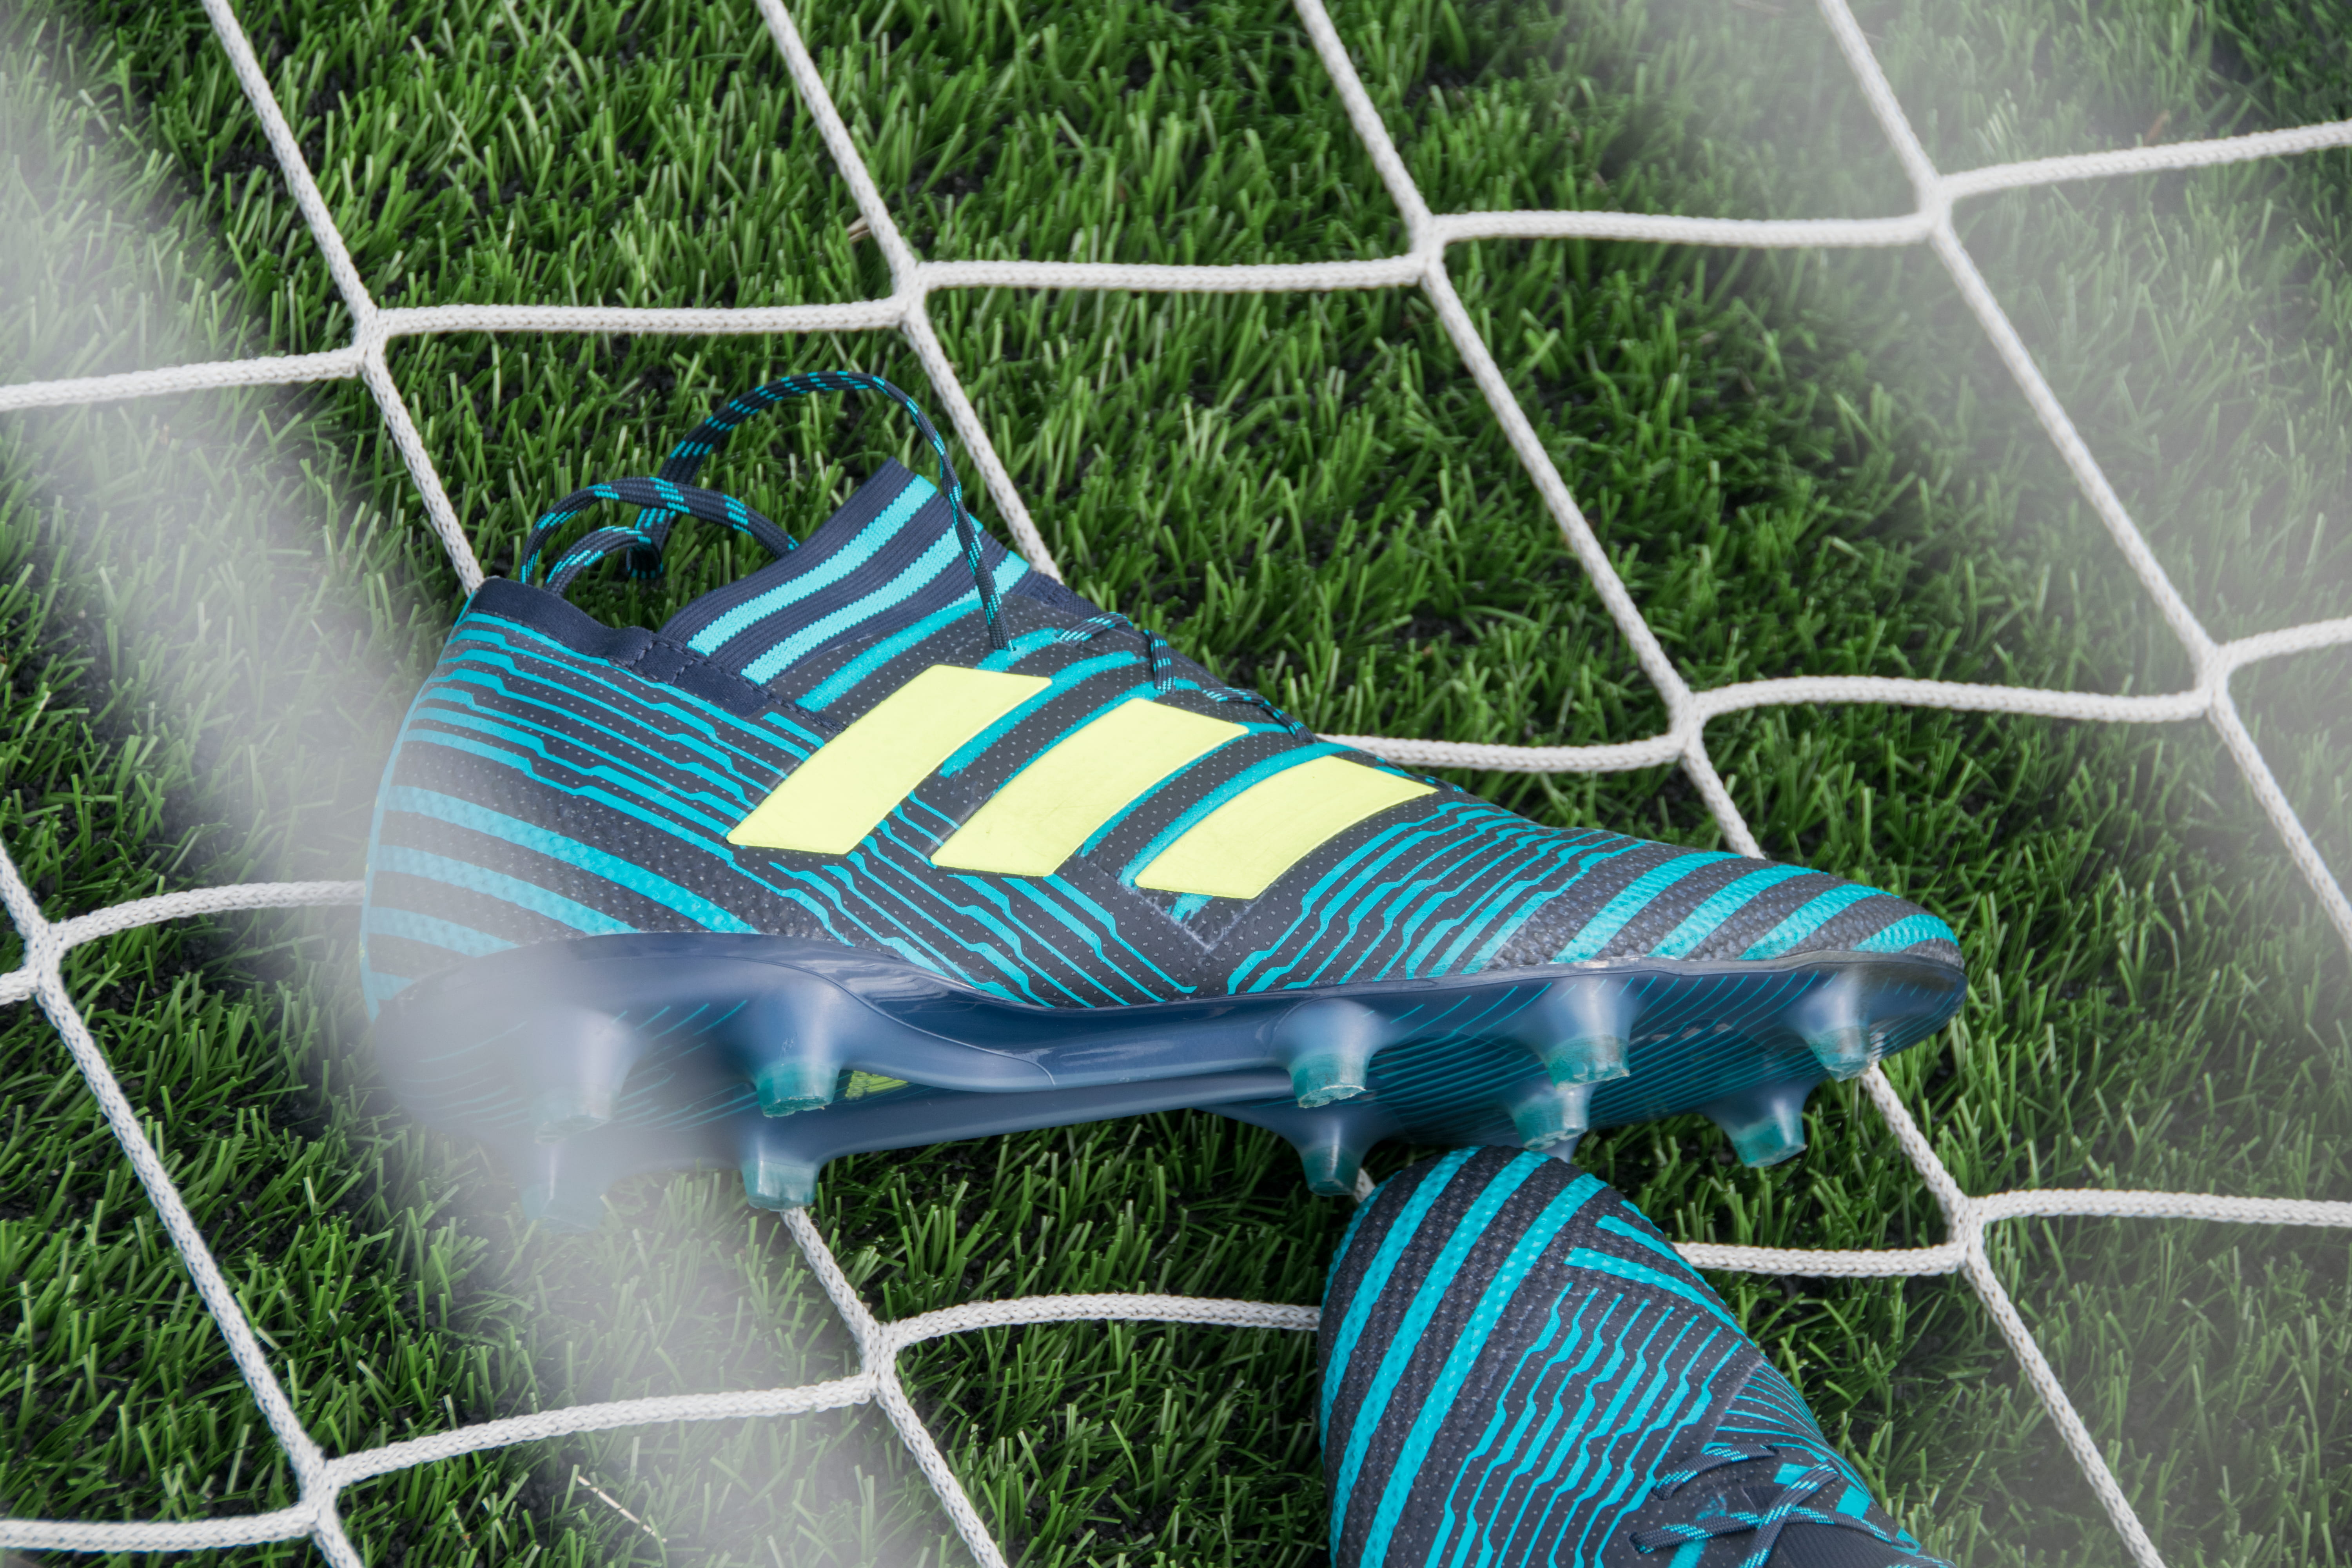 pair of blue-black-and-beige Adidas cleats, pair of green-and-black adidas cleats on white net